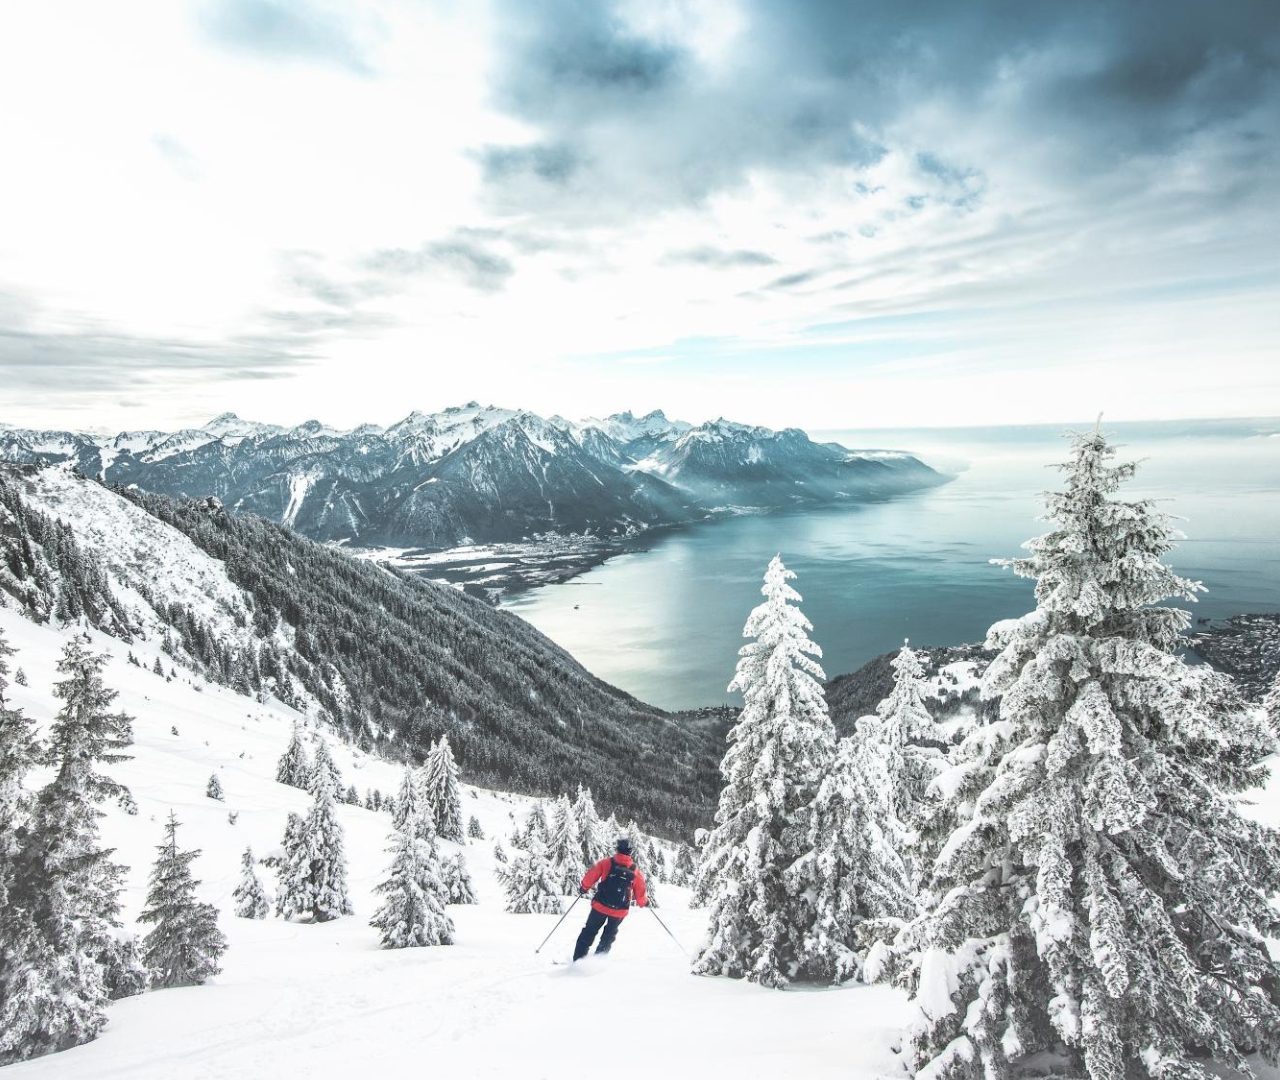 6D3N Montreux Winter (Flight Included)